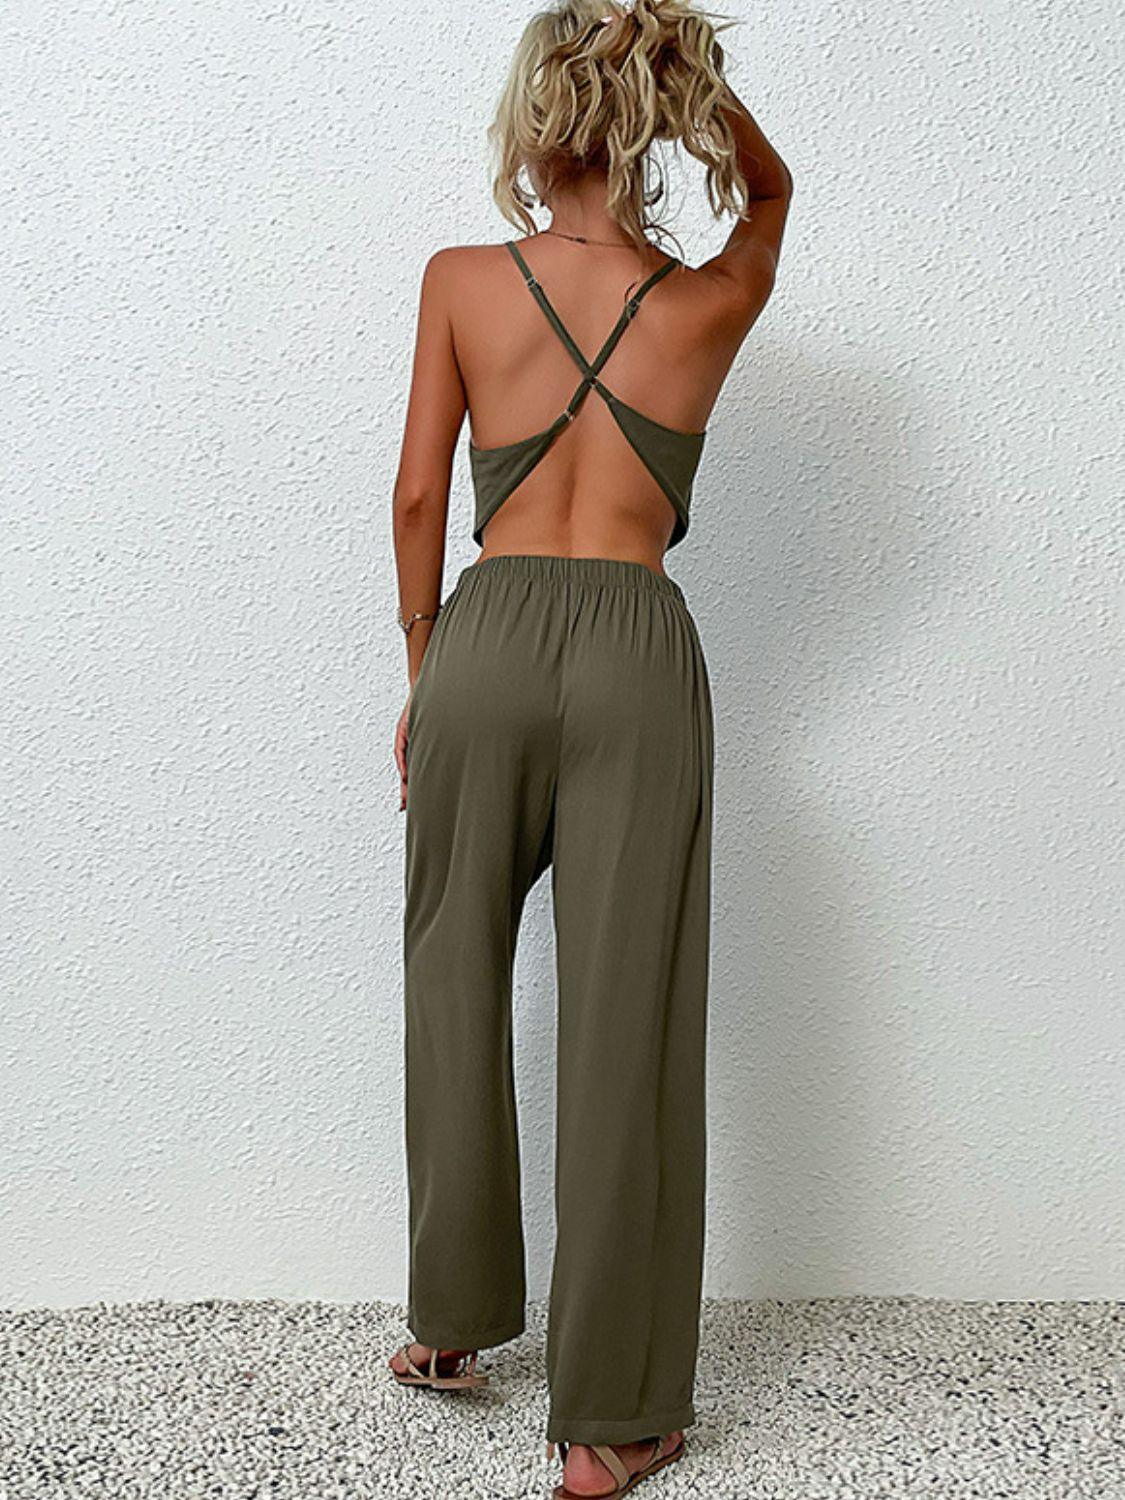 Life of the Party Backless Top and Pants Set - MXSTUDIO.COM